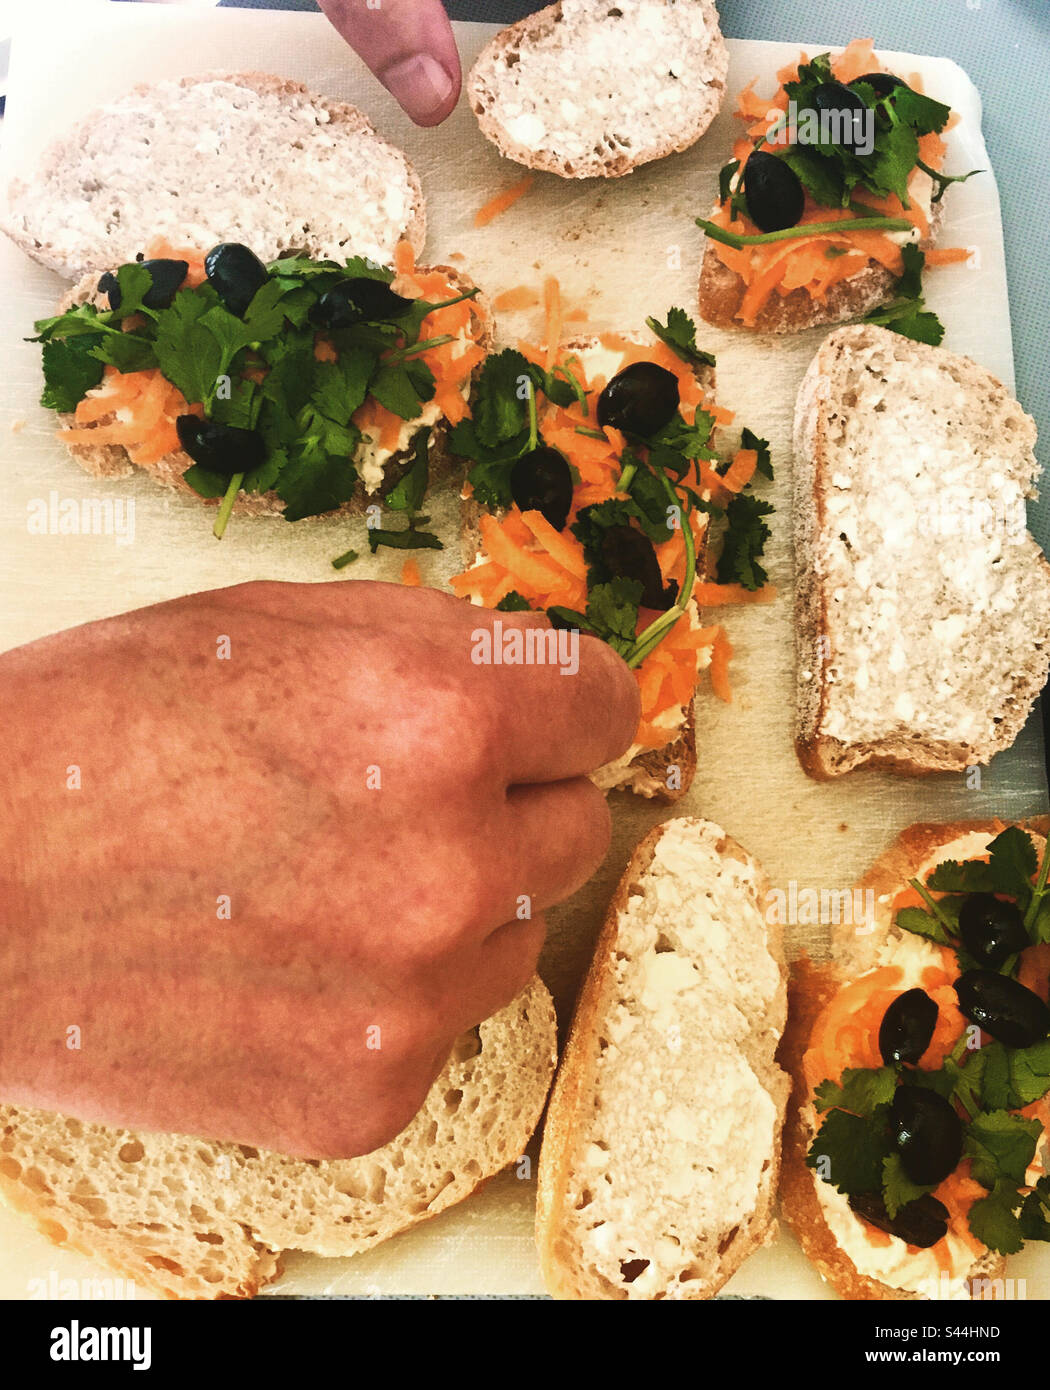 Vegan Sandwiches: Hands Making Houmous, Grated Carrot, Black Olive and Coriander Sandwiches on Sourdough Bread. Stock Photo